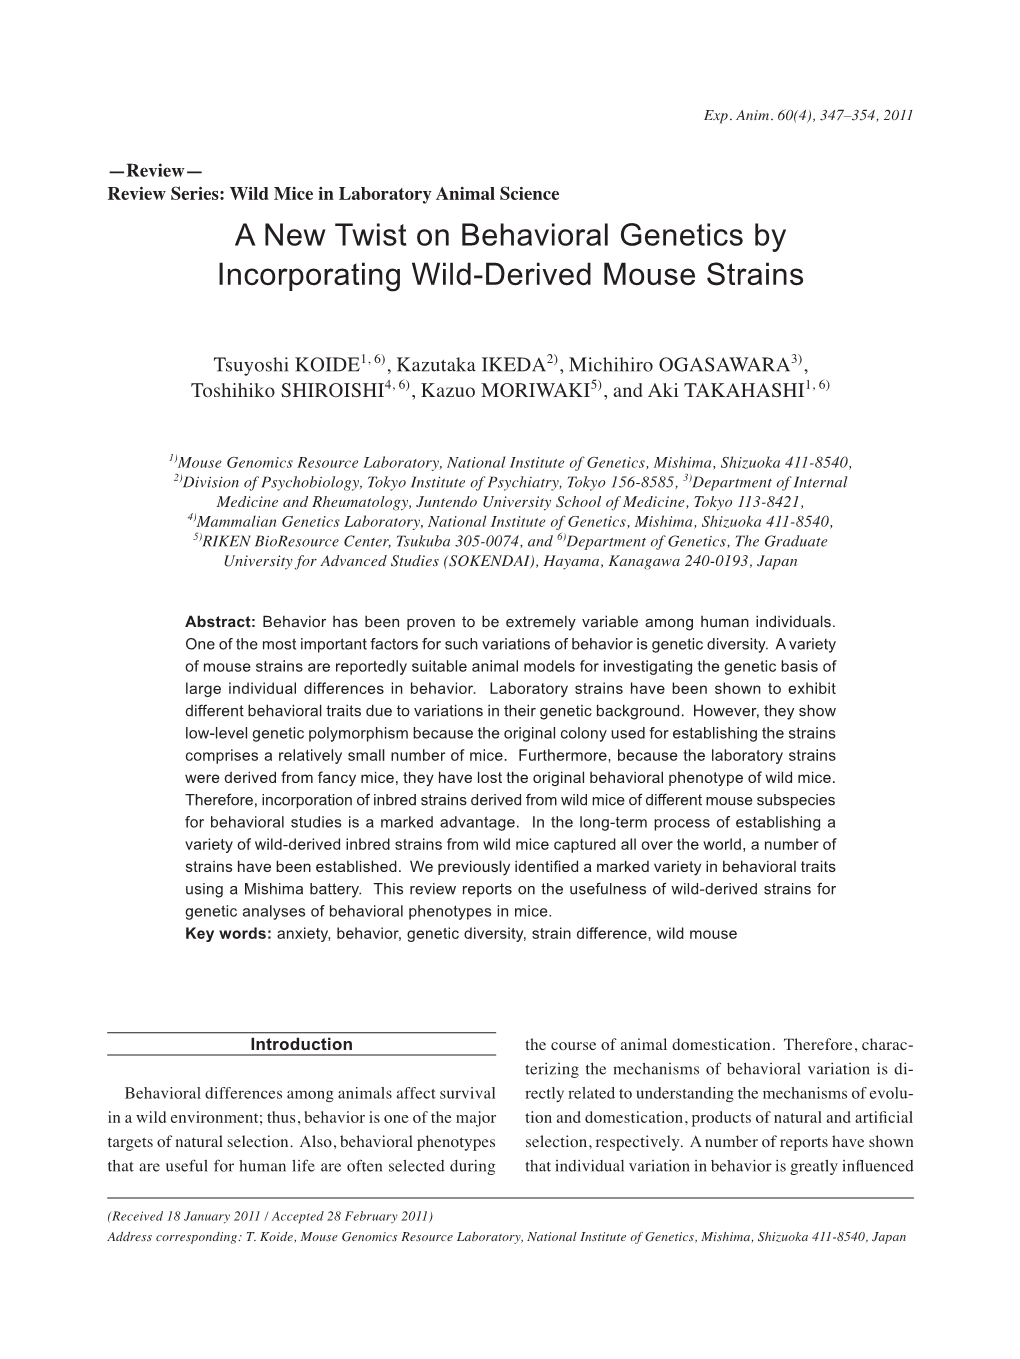 A New Twist on Behavioral Genetics by Incorporating Wild-Derived Mouse Strains